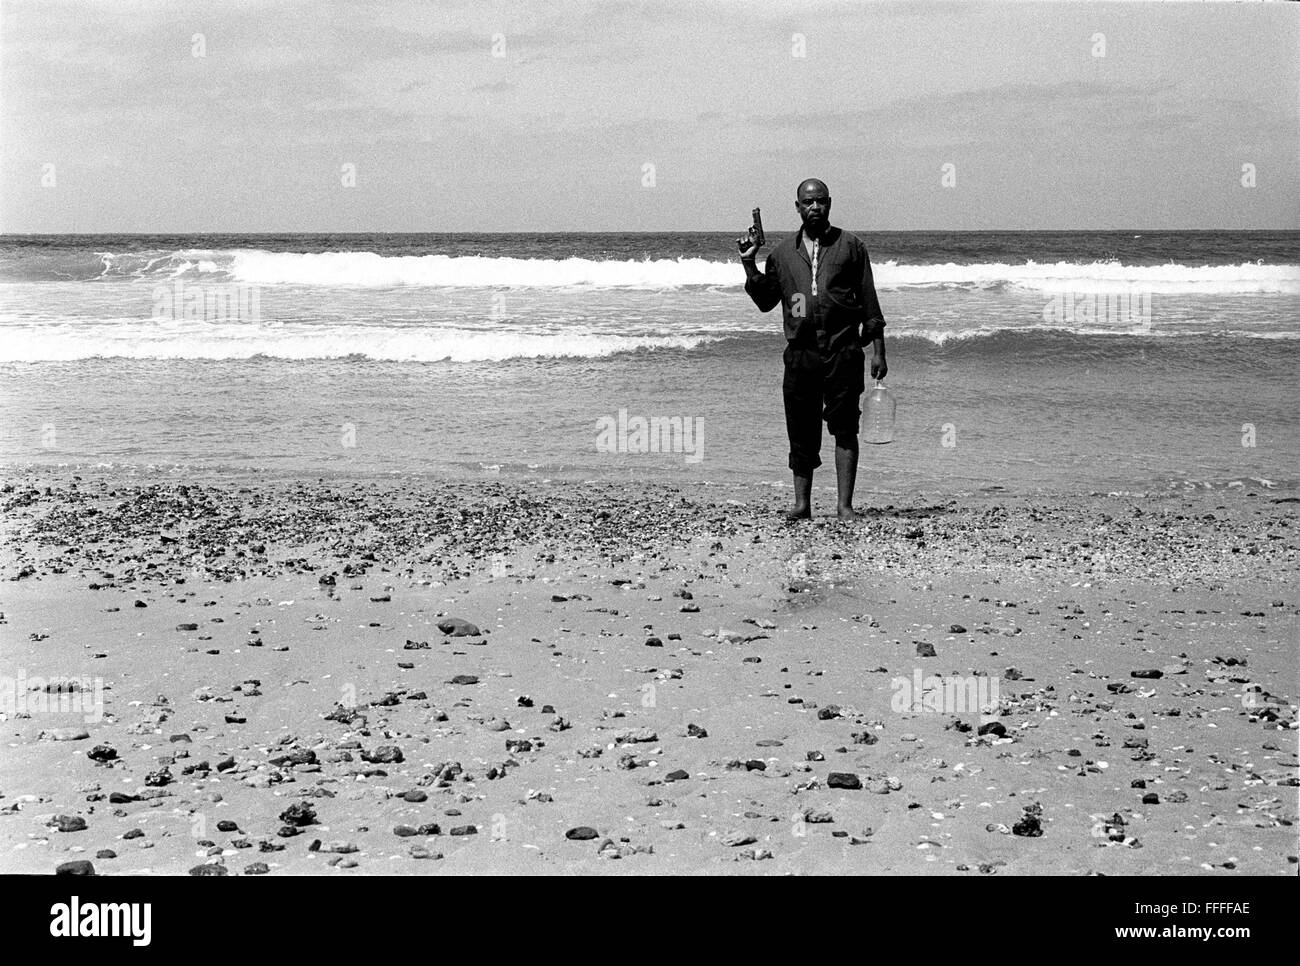 Jan 4, 2016 - South Beach, KwaZulu-Natal, South Africa - A pistol packing pastor collects water for the preying needs of his church. South Beach is a part of the City of Durban's longest uninterrupted stretch of beach sand. The City of Durban is on the eastern seaboard of South Africa and the people here are washed with the warm waters of the Indian Ocean. To the north of this stretch of sand are beaches with cafe society hang outs. To the south there is a pier with the upmarket Moyo's Restaurant at it's end and the uShaka Marine World complex and the private surf and sea clubs of the Vetches Stock Photo